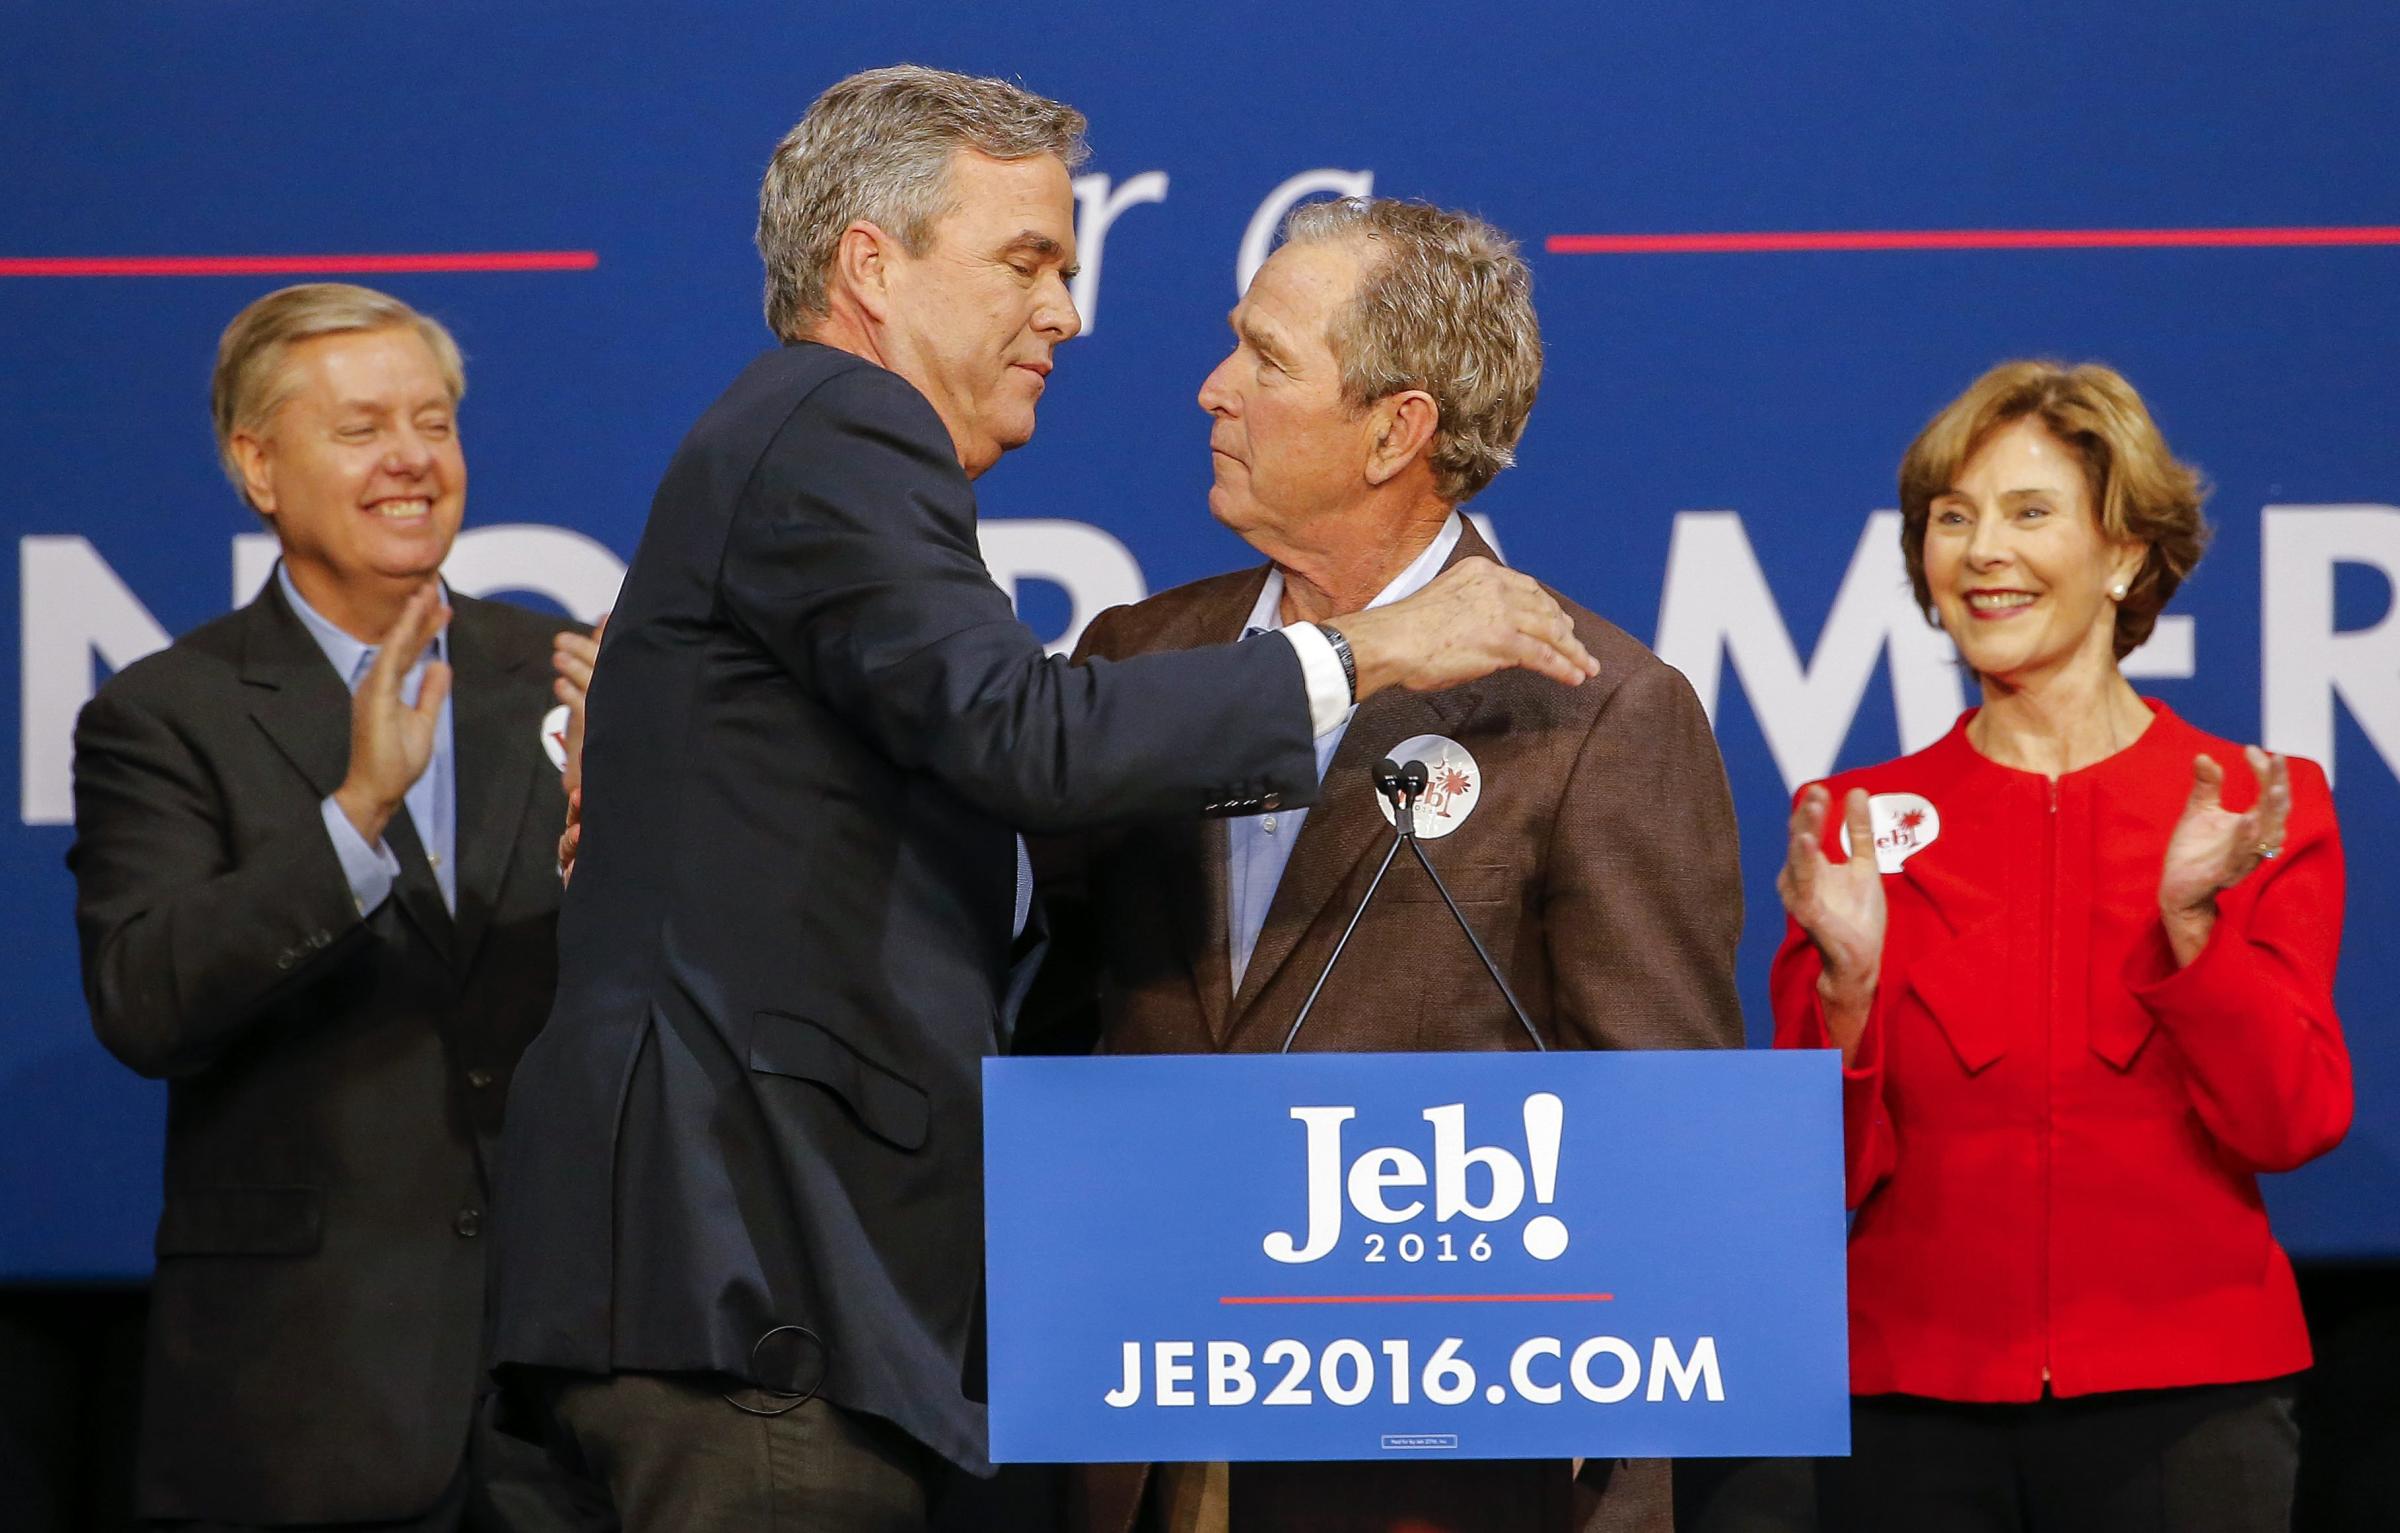 Republican presidential candidate and former Florida Gov. Jeb Bush, center left, participates in a campaign event with his brother, former U.S. President George W. Bush in North Charleston, S.C. on Feb. 15, 2016. Former First Lady Laura Bush, right, and South Carolina Senator Lindsey Graham, left, appear on stage.